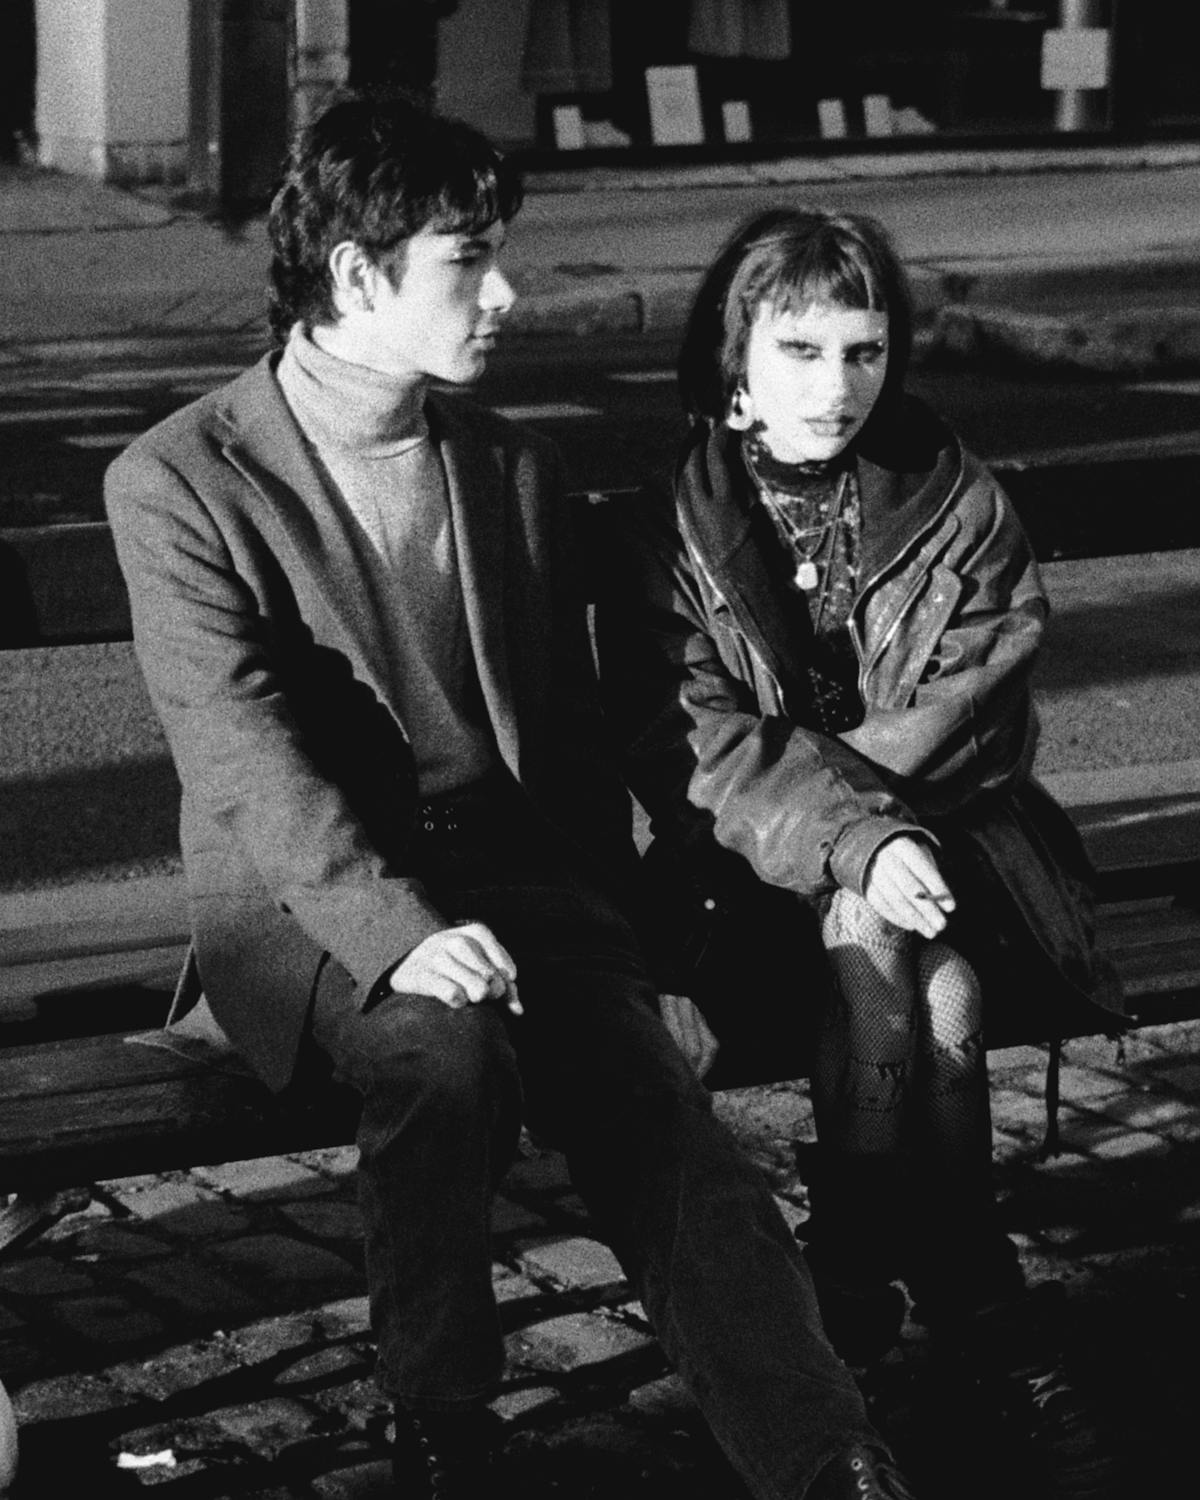 Two young people on a bench